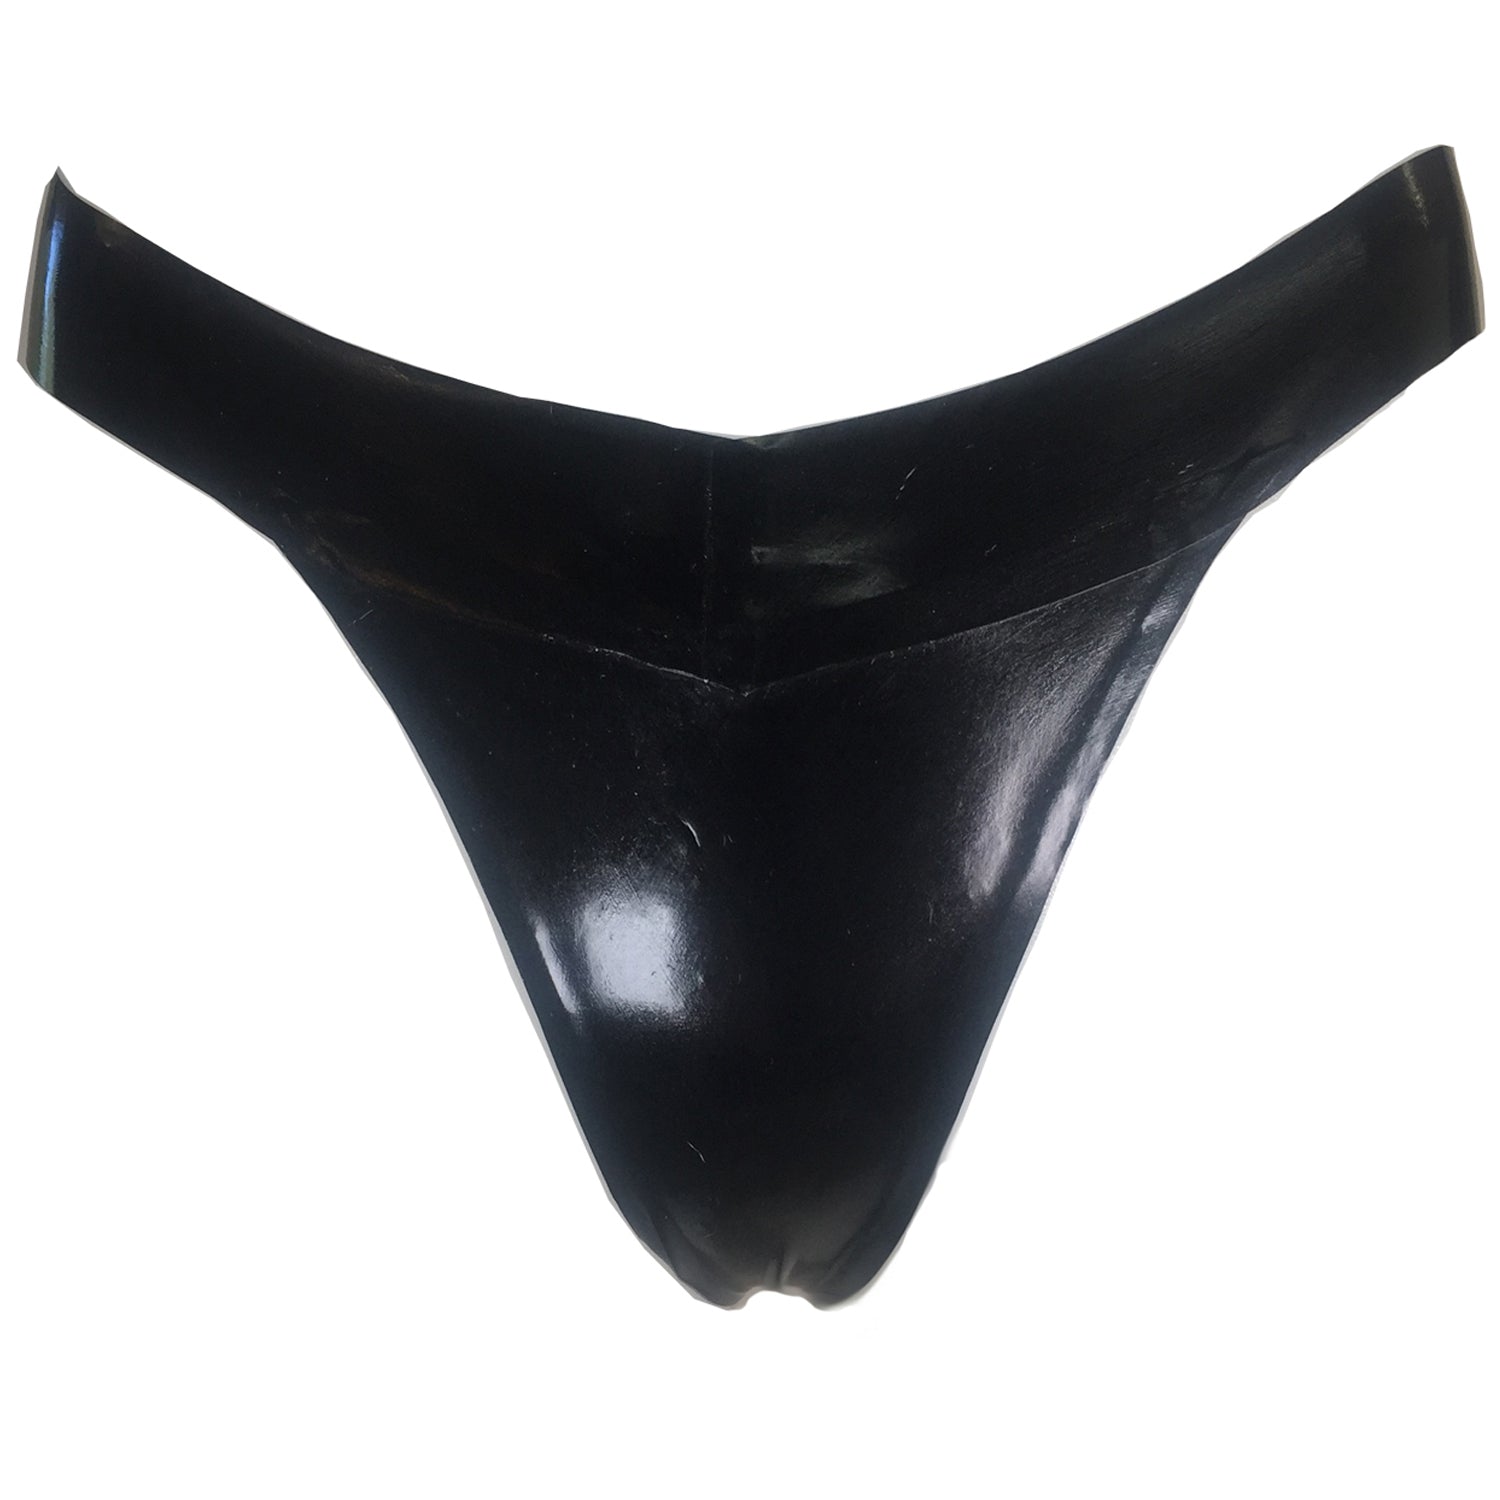 Unbranded Latex Panties for Women for sale